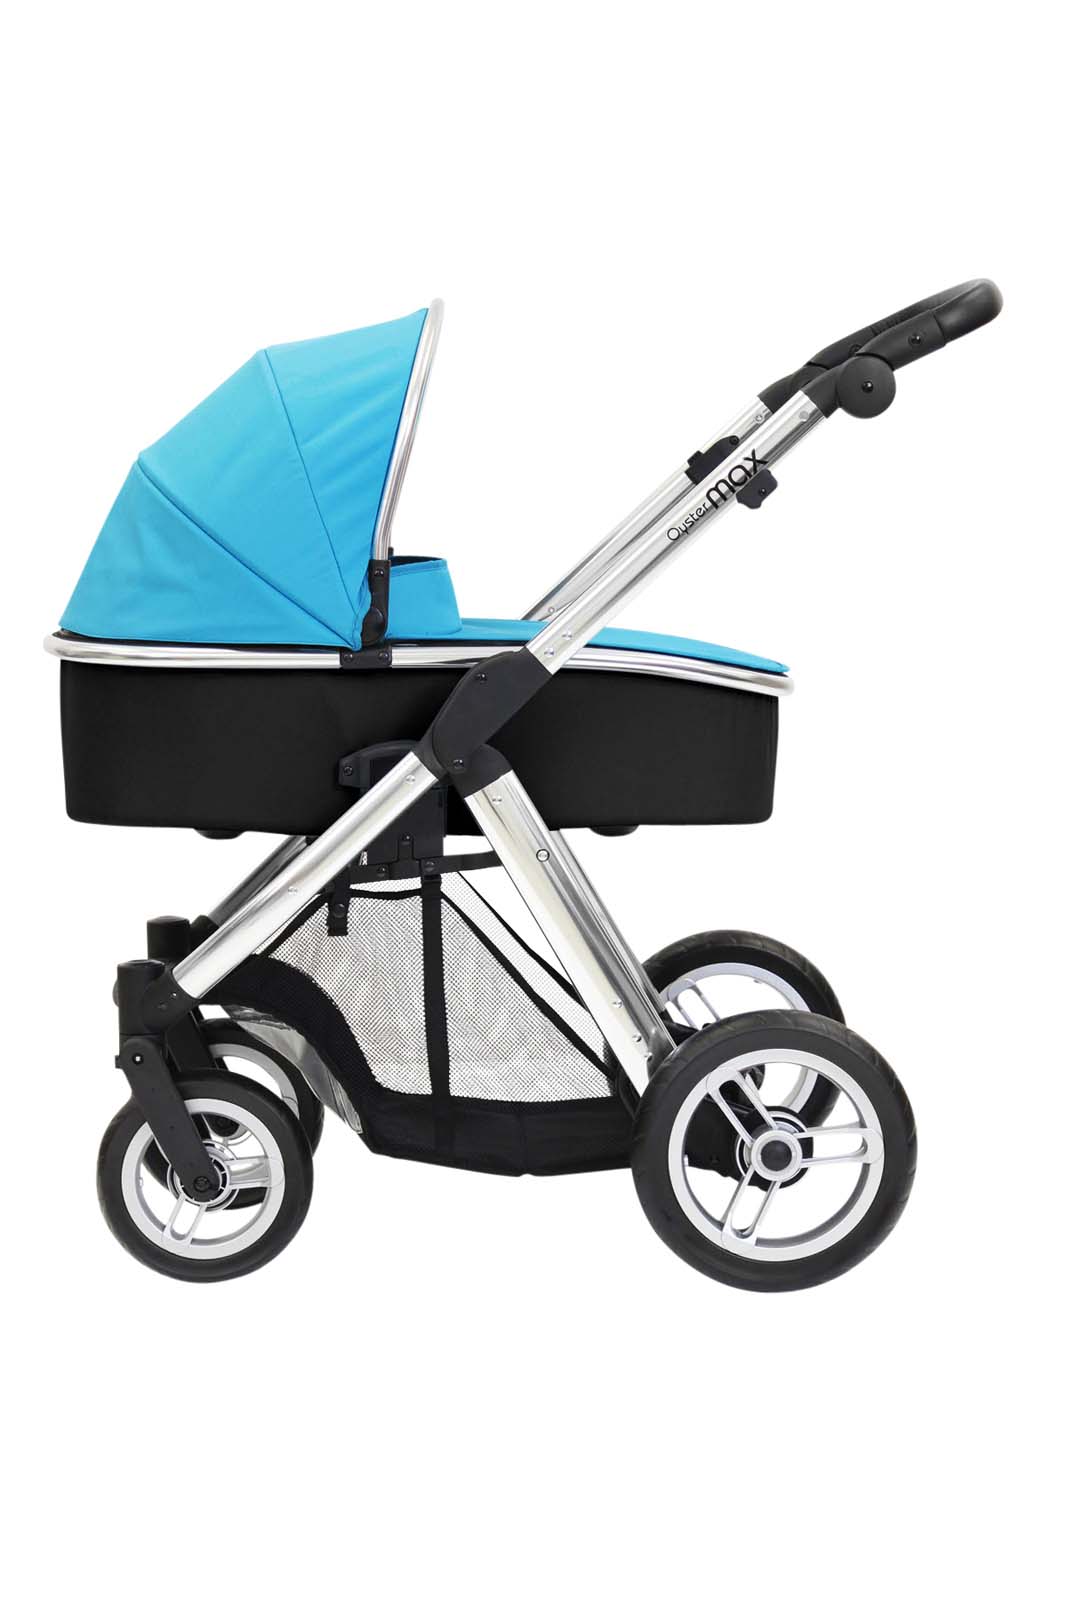 25 OysterMax_Carrycot_MirrorChassisSide_Ocean-var.jpg